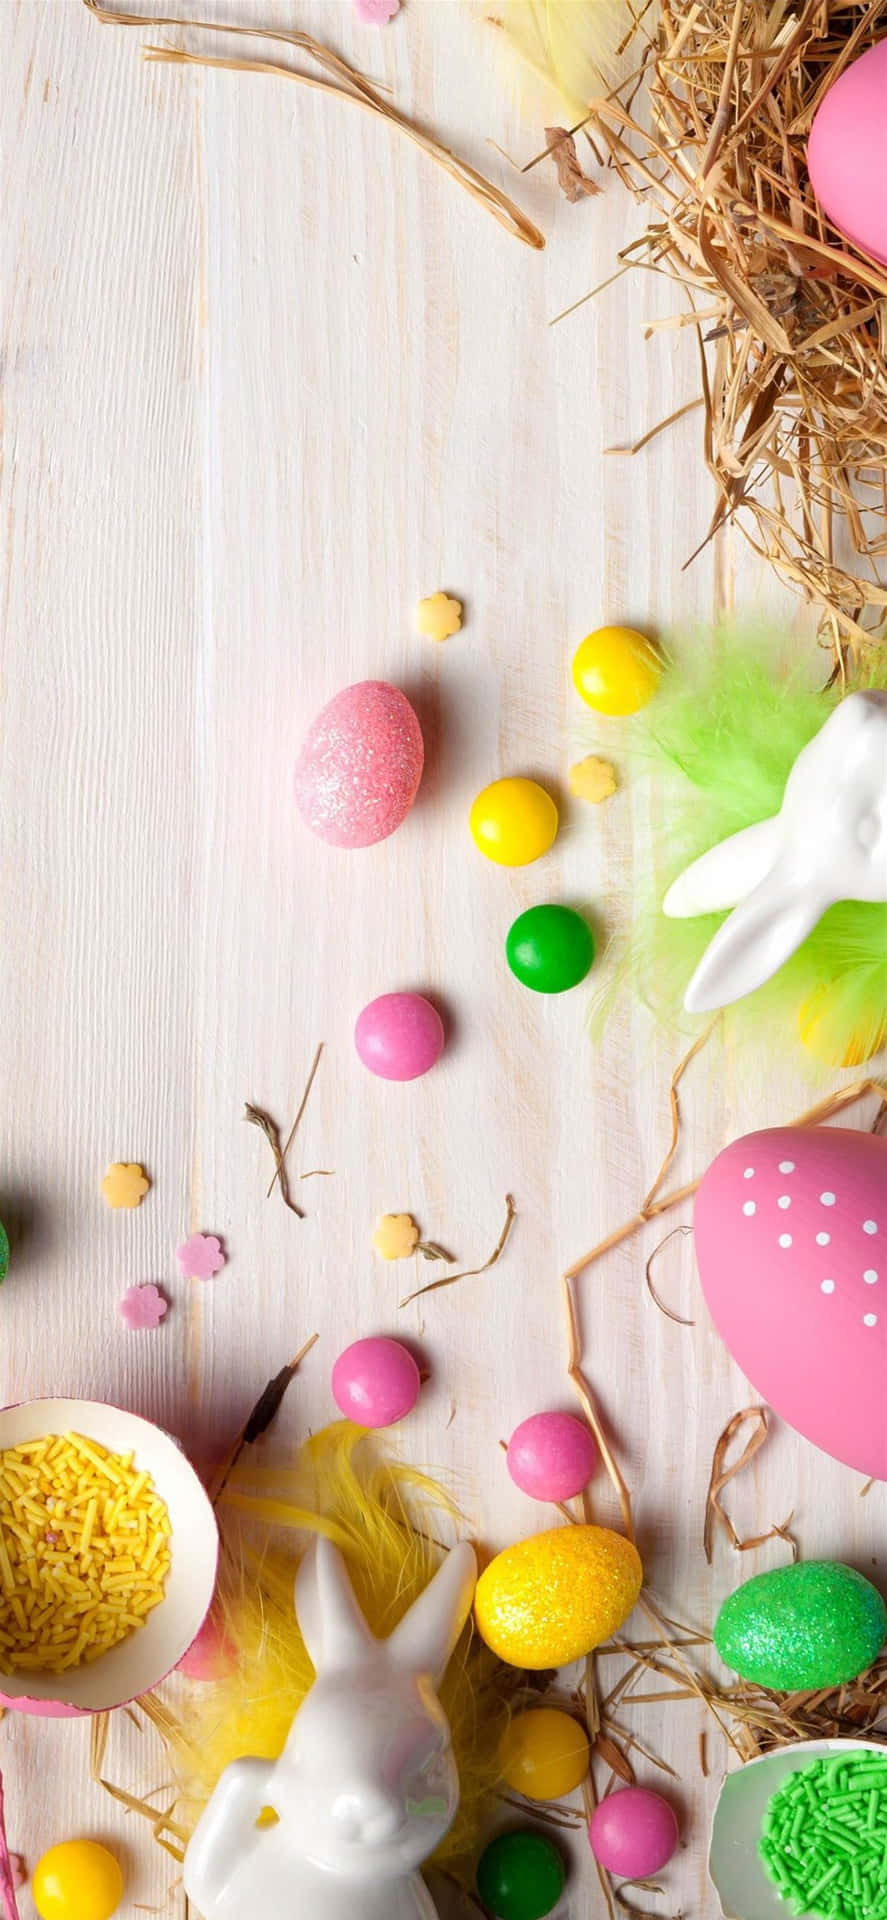 Let the joy of Easter fill your heart with this Cute Easter Iphone wallpaper Wallpaper